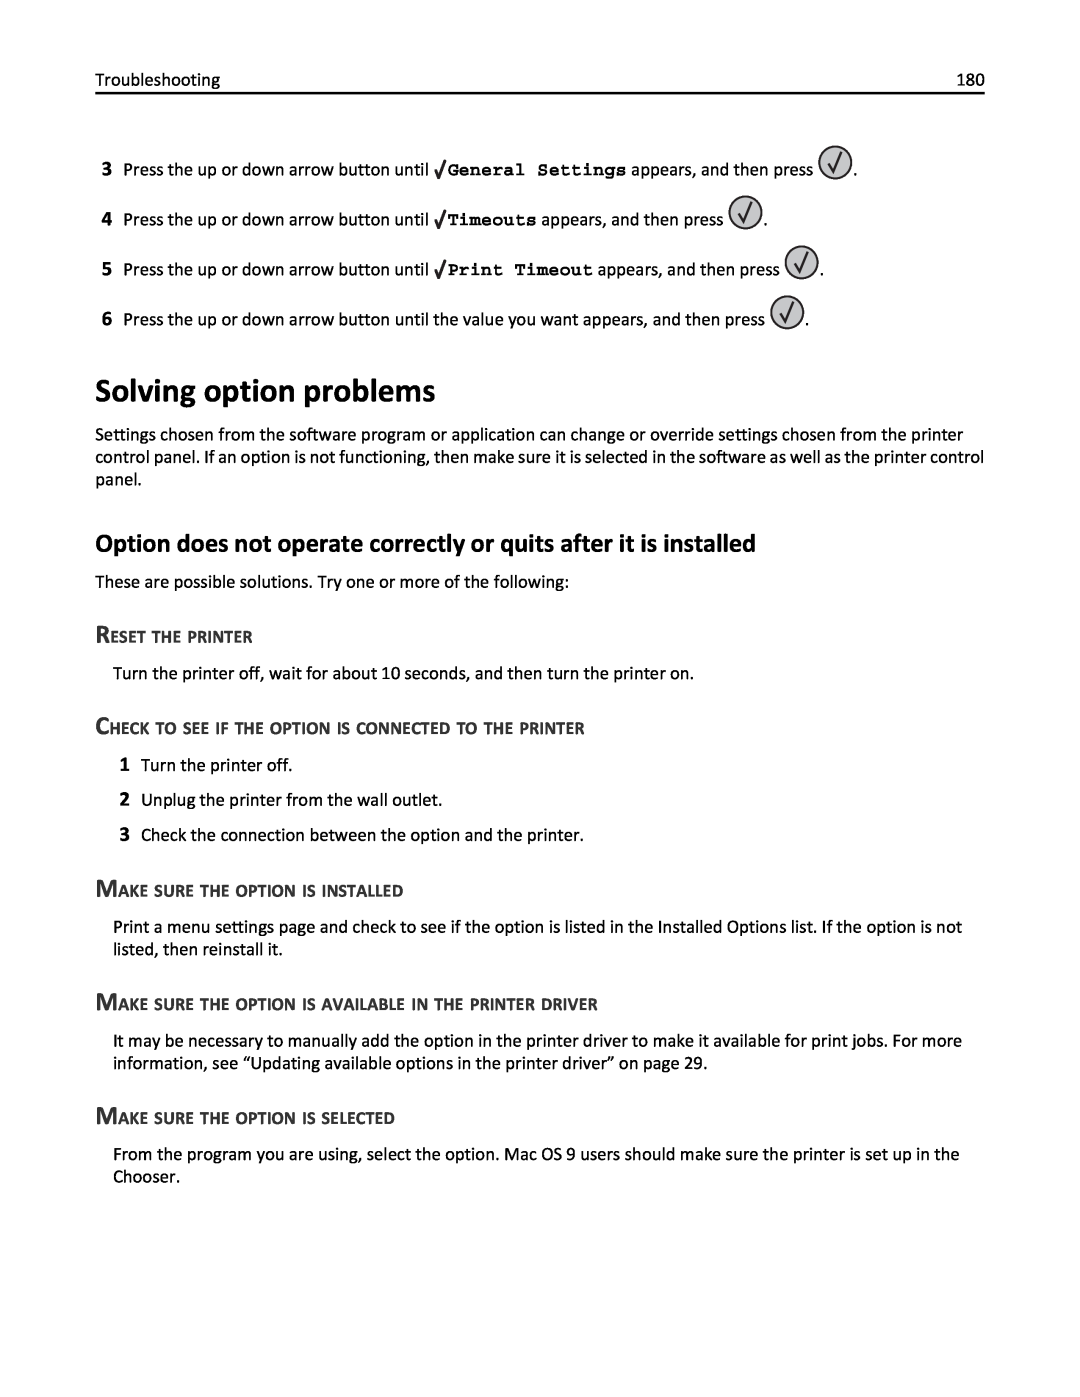 Lexmark 110 Solving option problems, Option does not operate correctly or quits after it is installed, Reset The Printer 